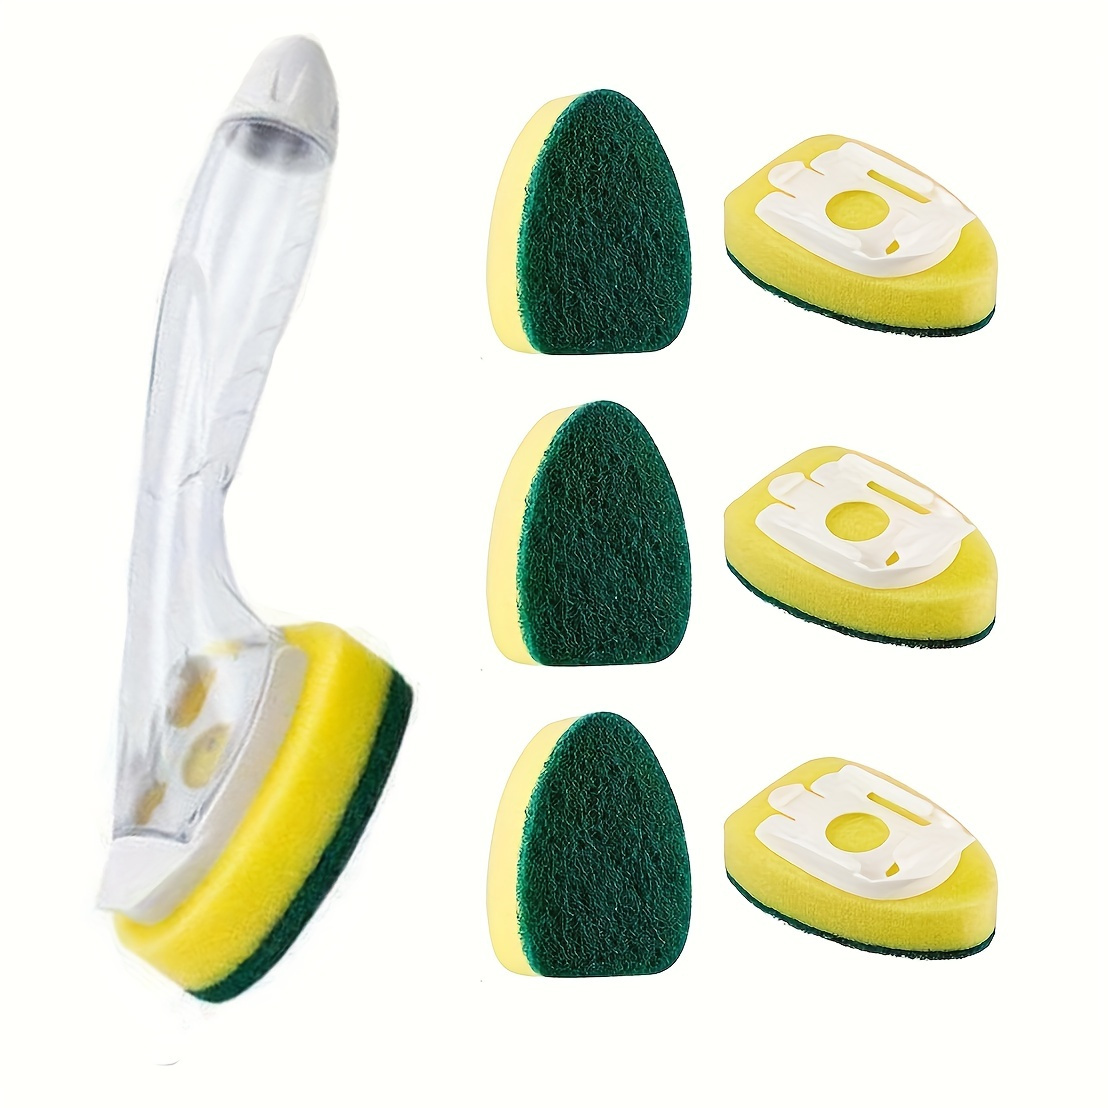 

7pcs/set Replcement Head Dish Sponge, Restaurant Kitchen Sink Cleaning Brush - Perfect For Cleaning & Scrubbing!